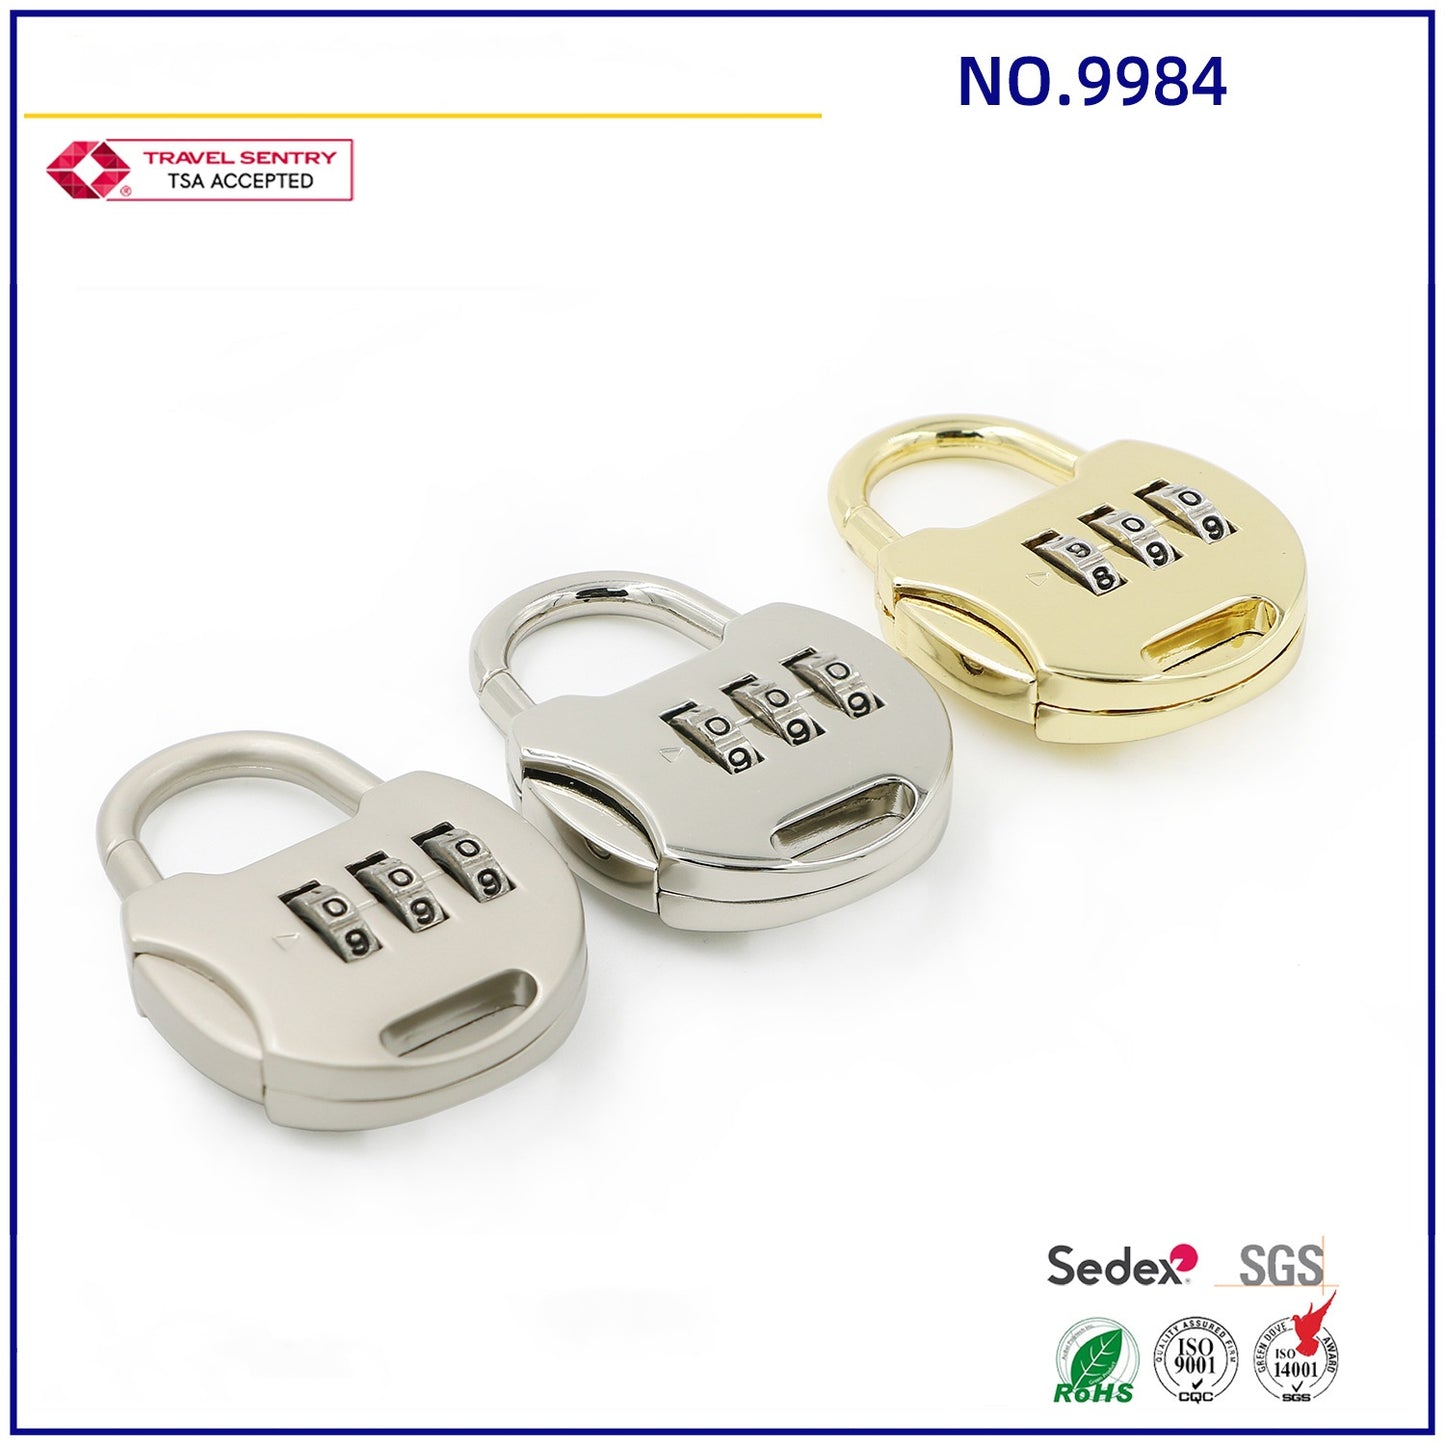 the latest design of 3 digit code zipper plastic lock for security luggage backpack lock customs lock accessories for handbags-25